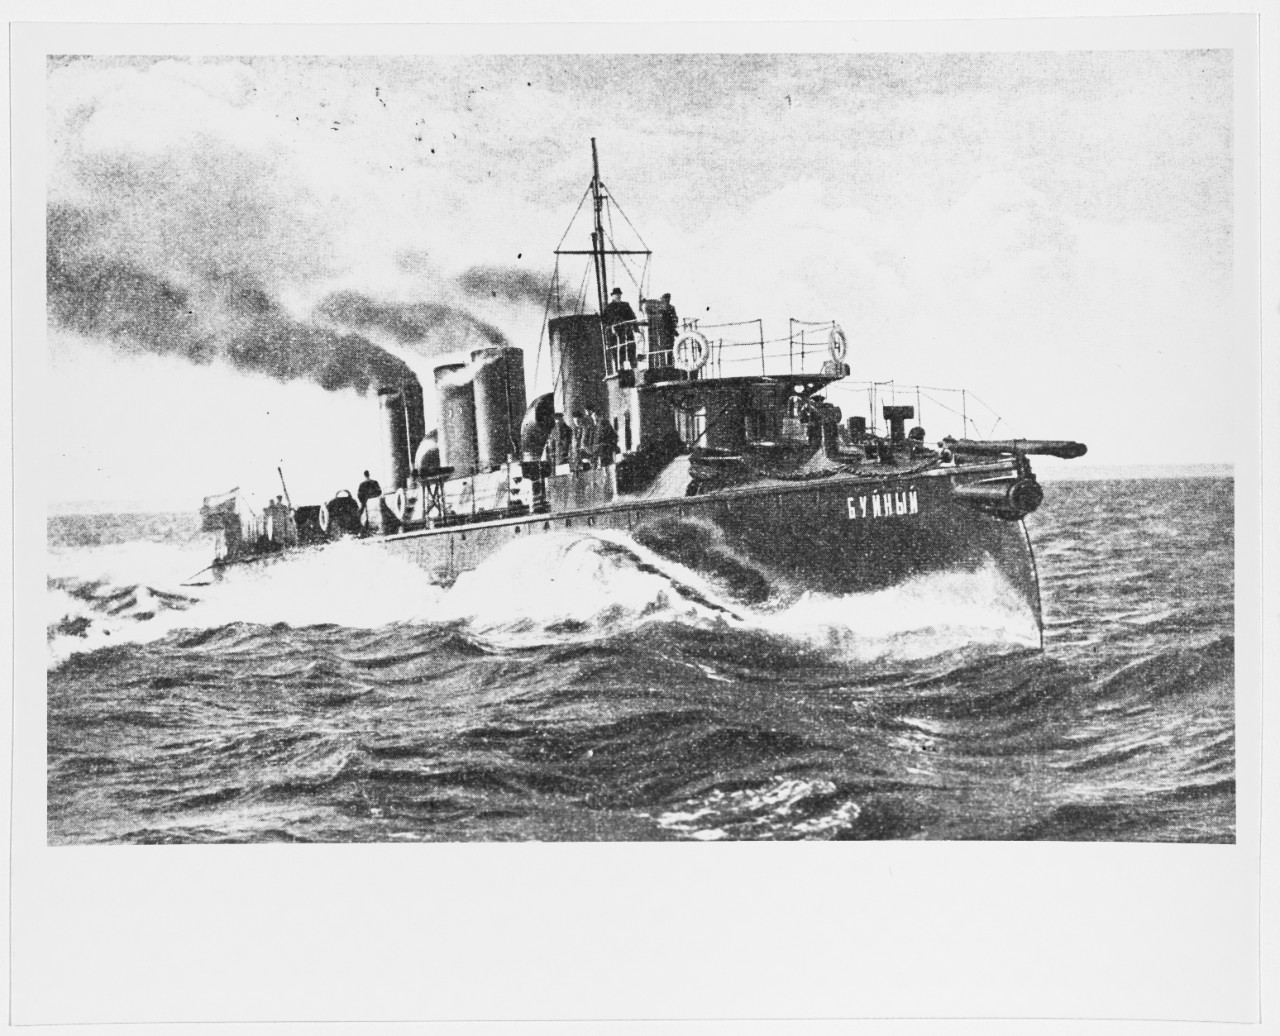 BUINI (Russian Destroyer, 1901-05)